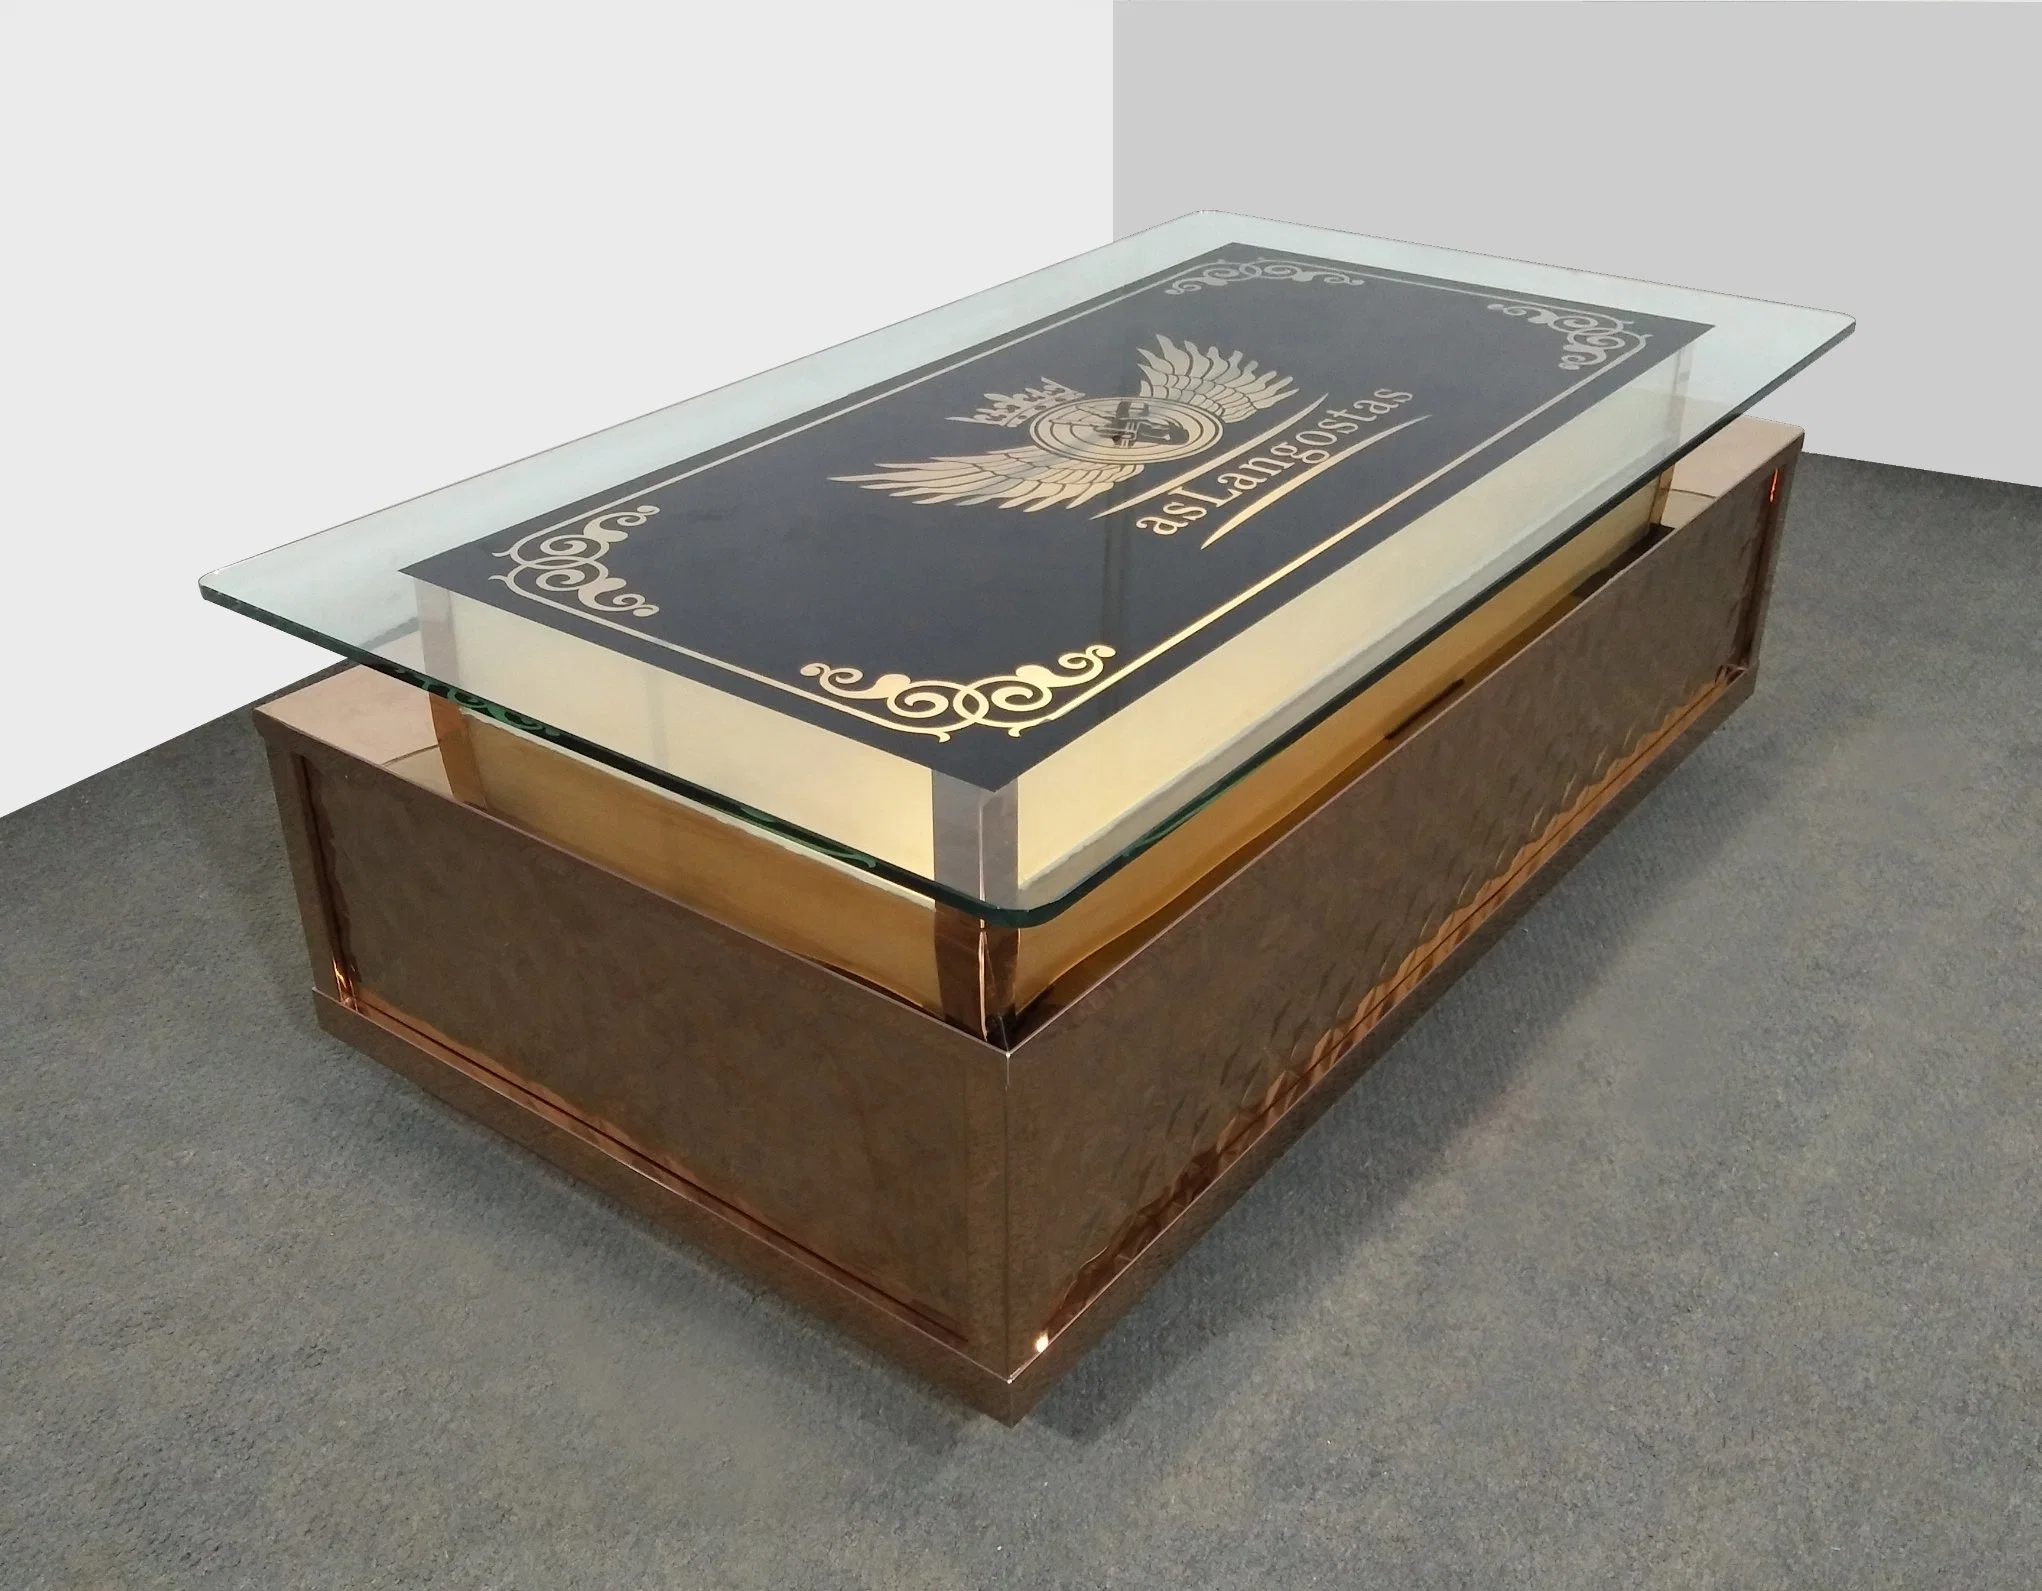 Exclusive Night Club Furniture with High-End Decor KTV Glass Coffee Table